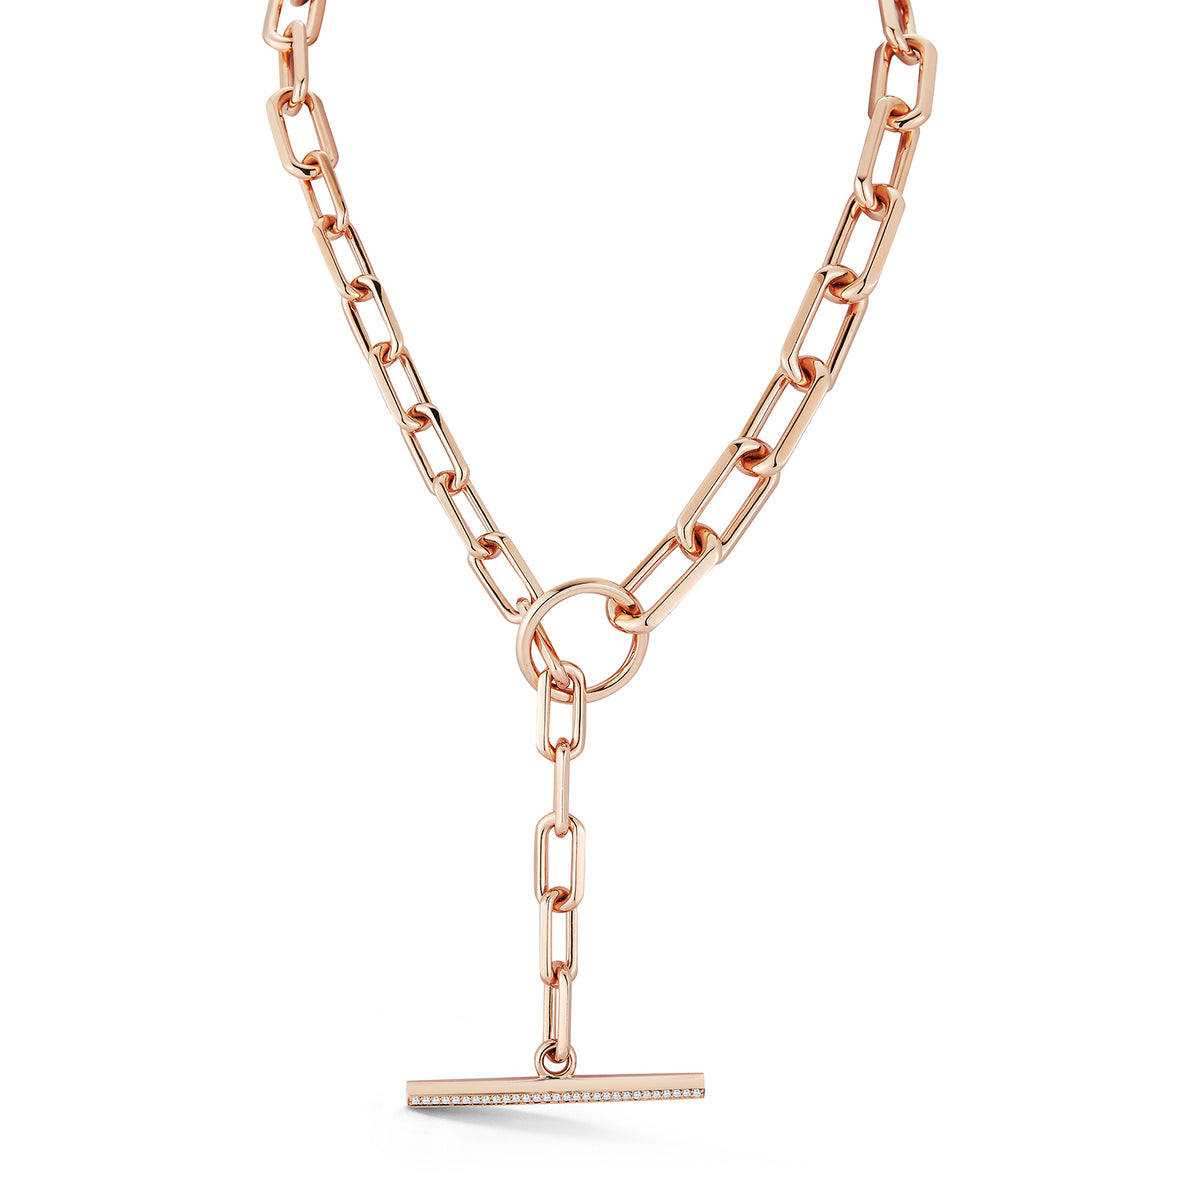 Lv Chain Links Necklace Length